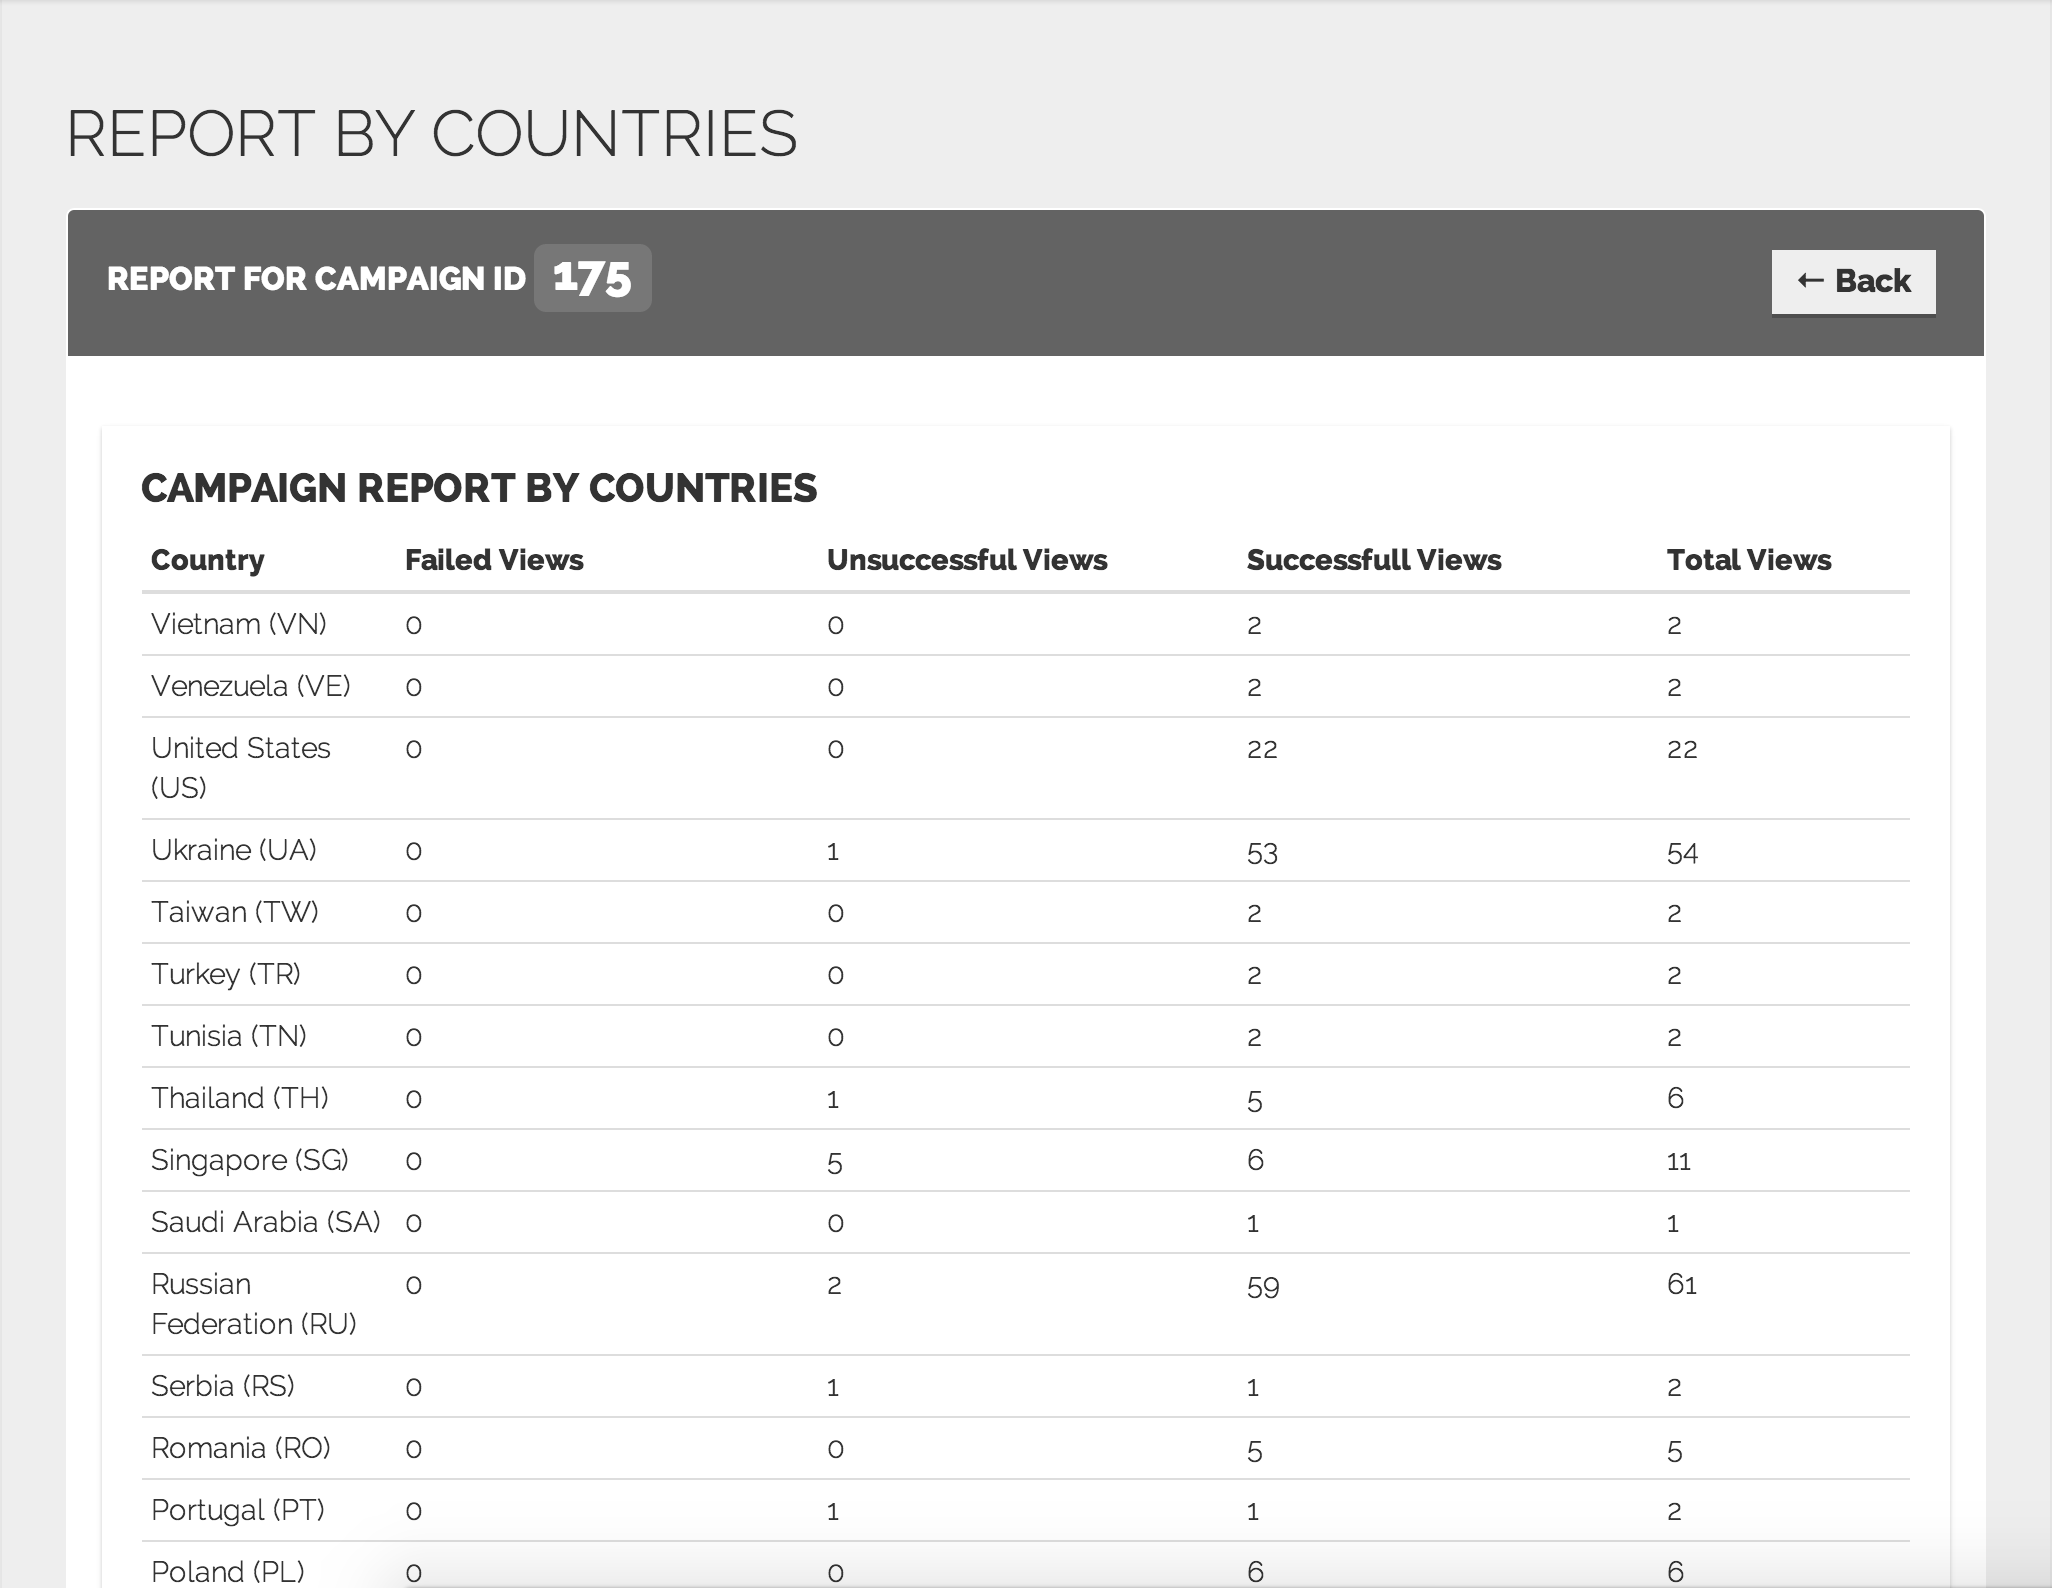 Reports by countries